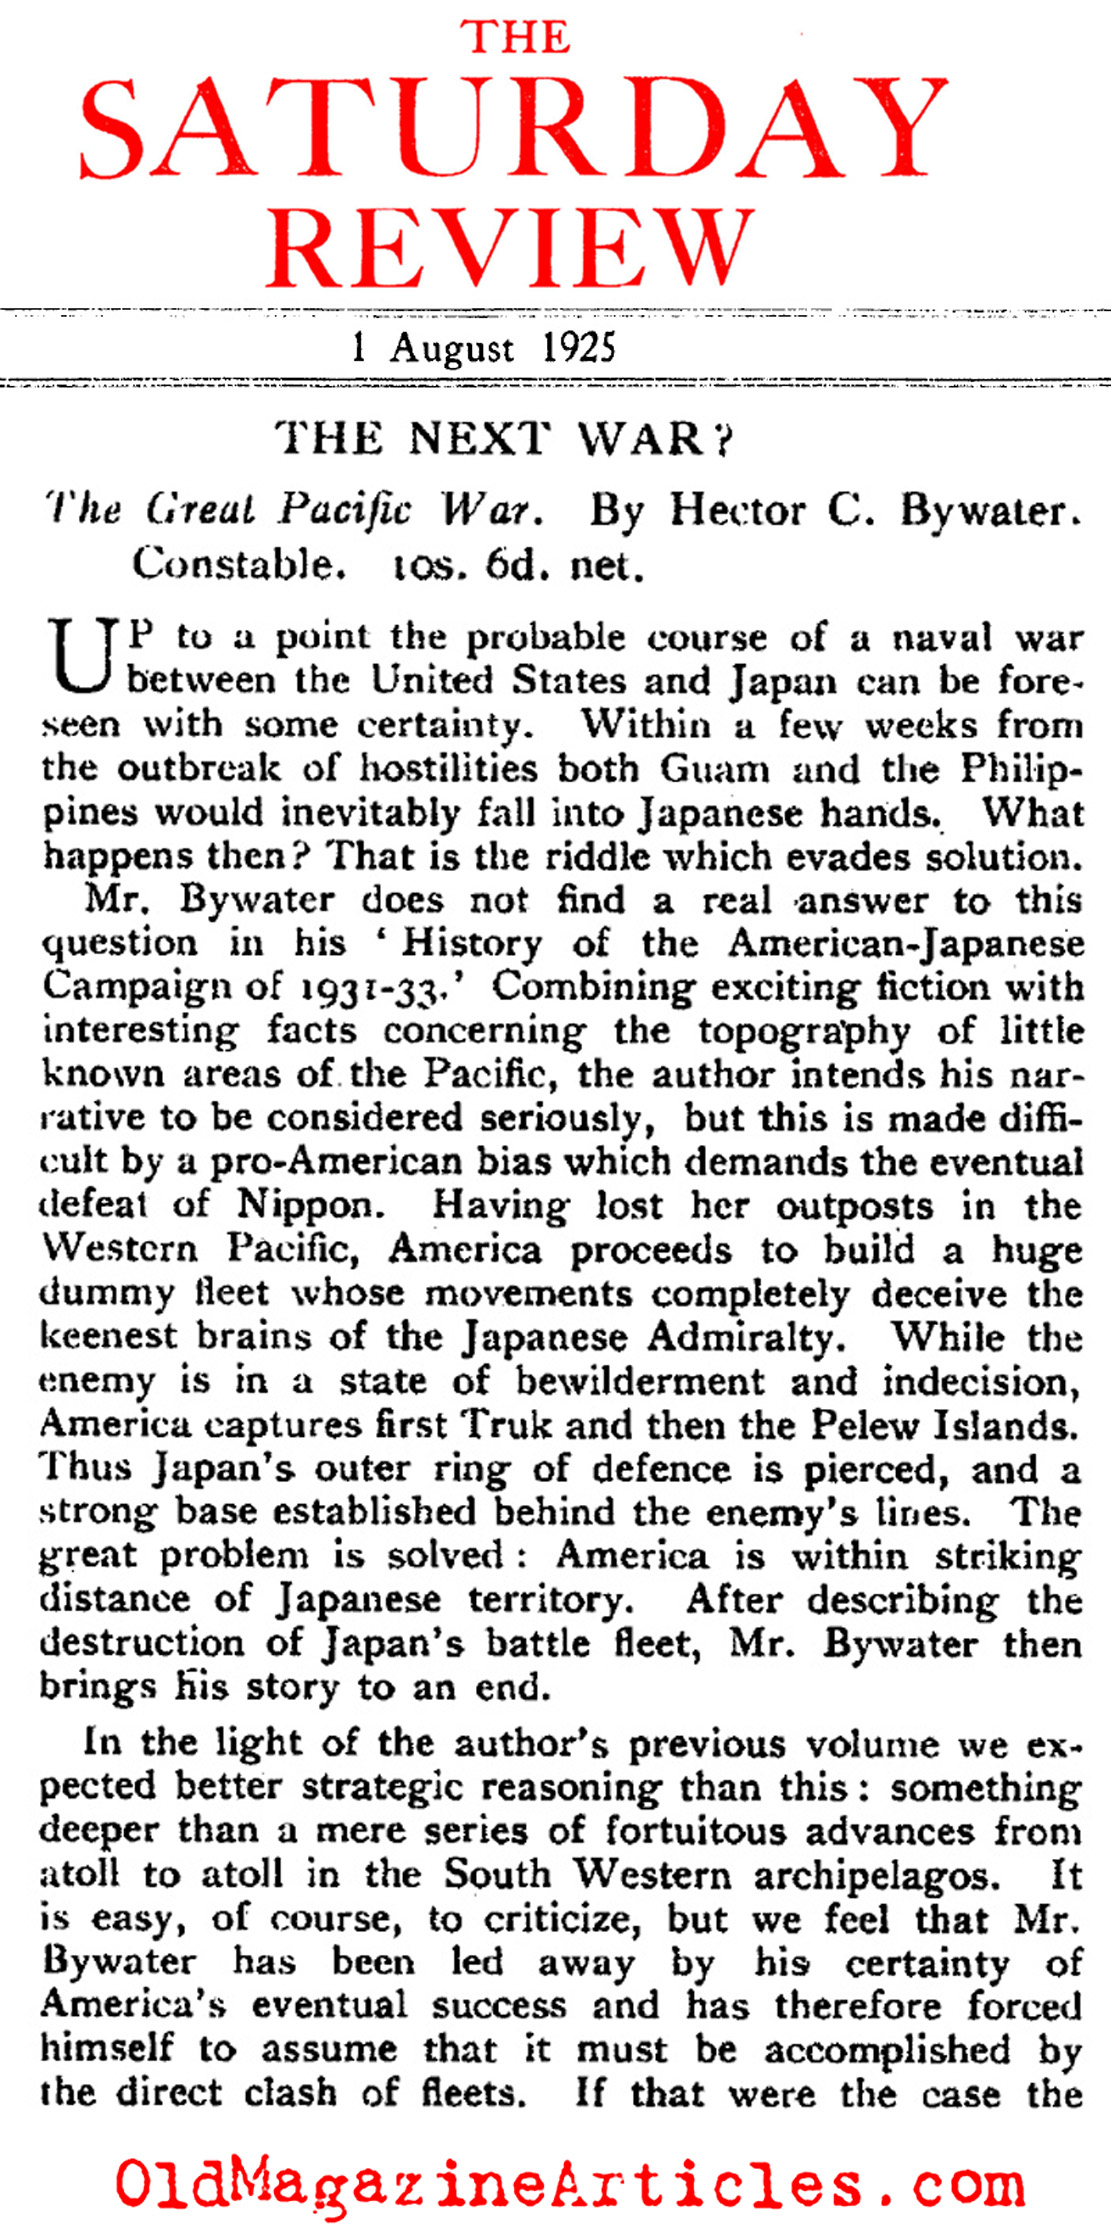 Anticipating the War with Japan (The Saturday Review, 1925)